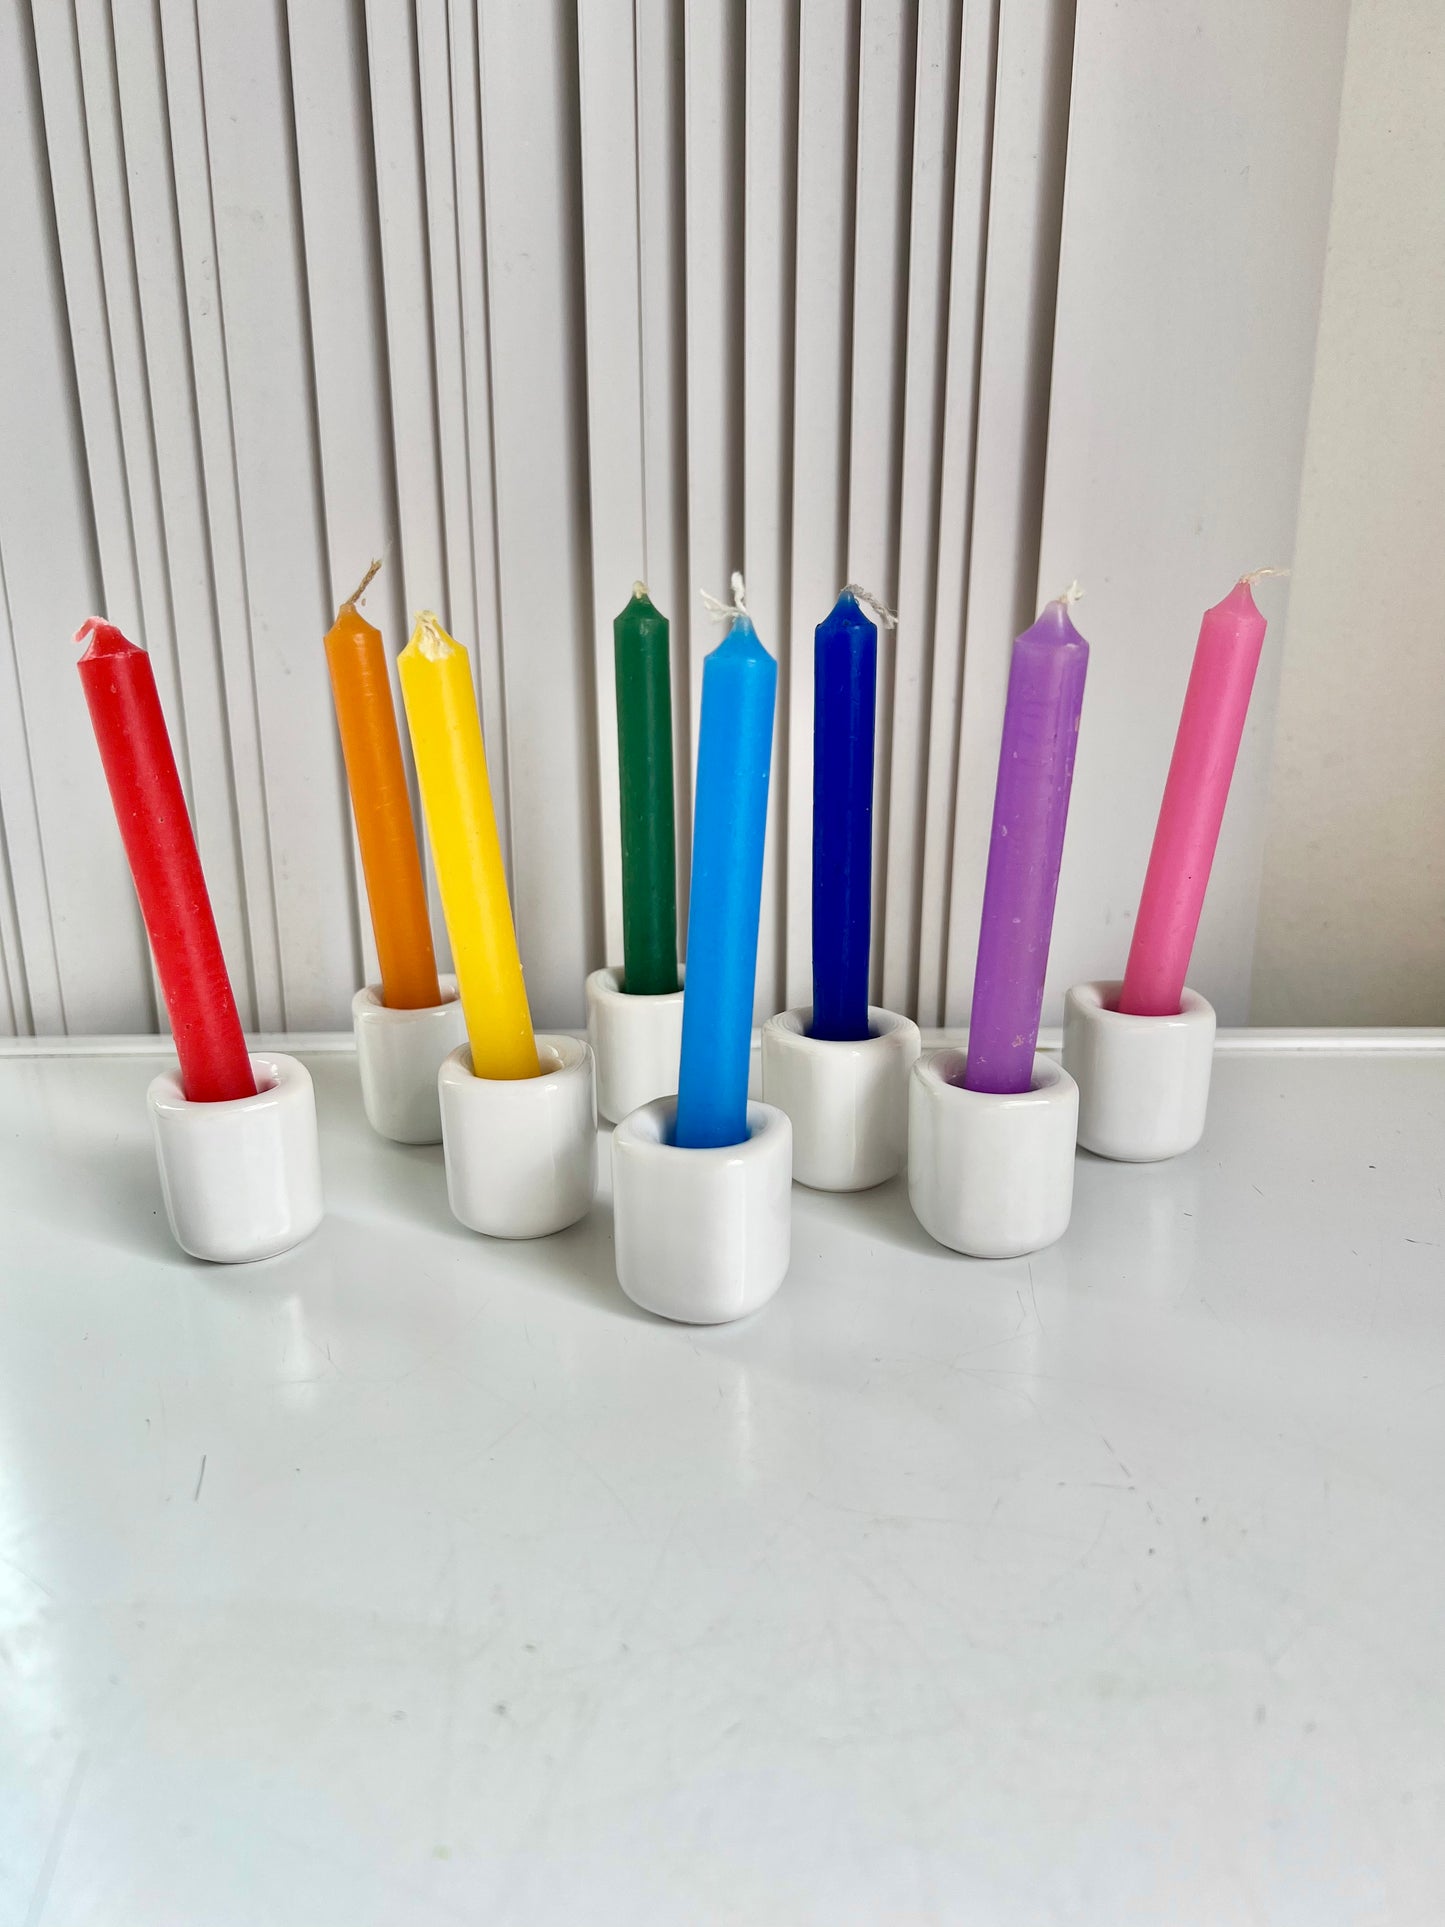 RAINBOW “CHIME” SPELL CANDLES